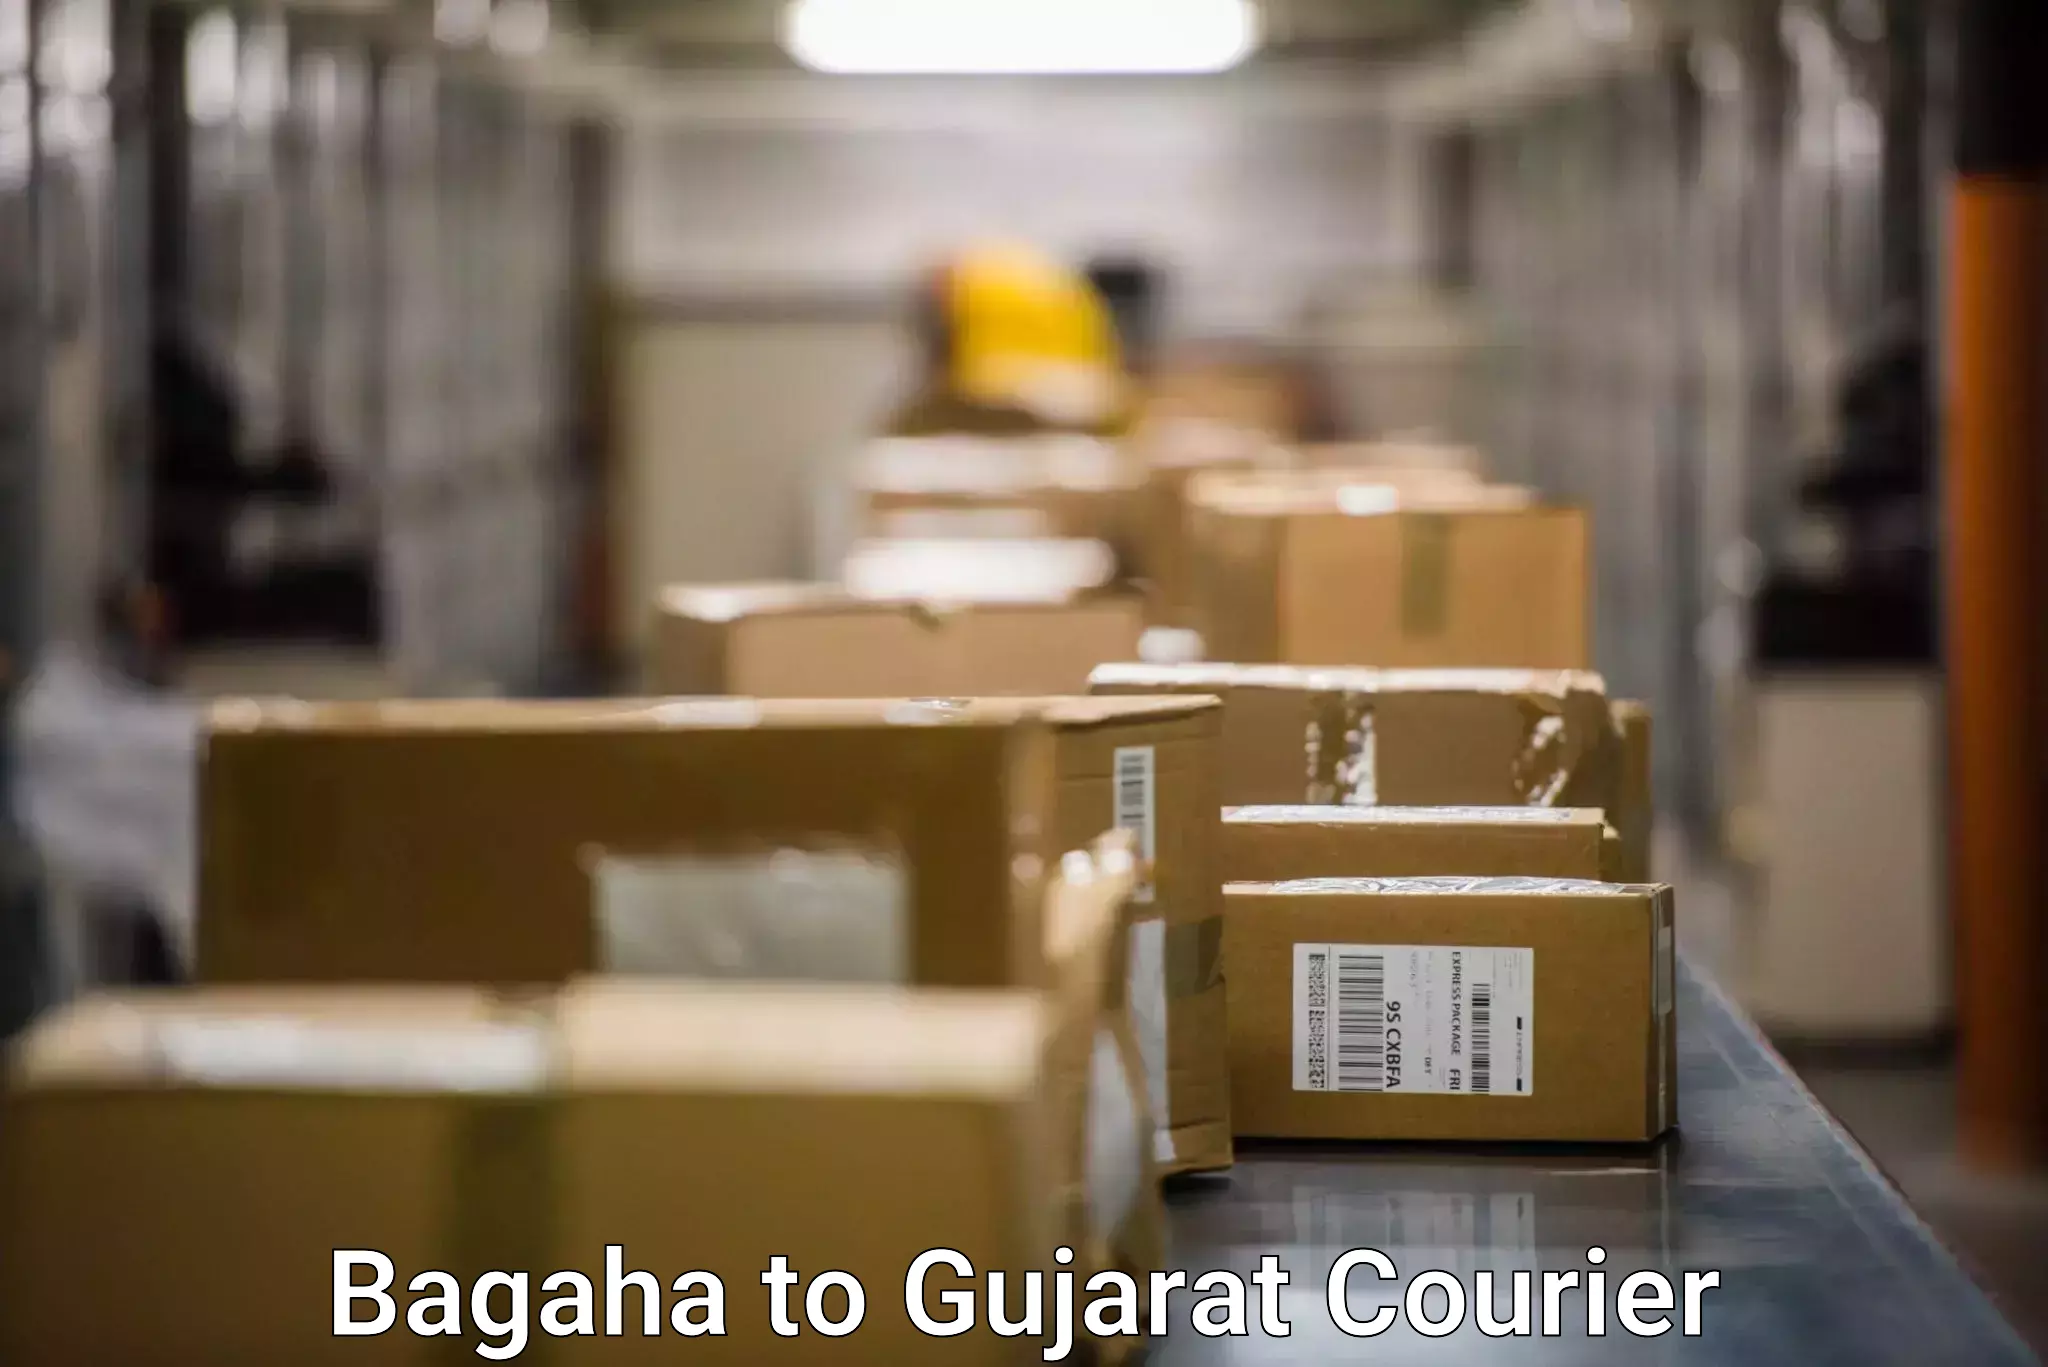 Customer-centric shipping in Bagaha to Mehsana